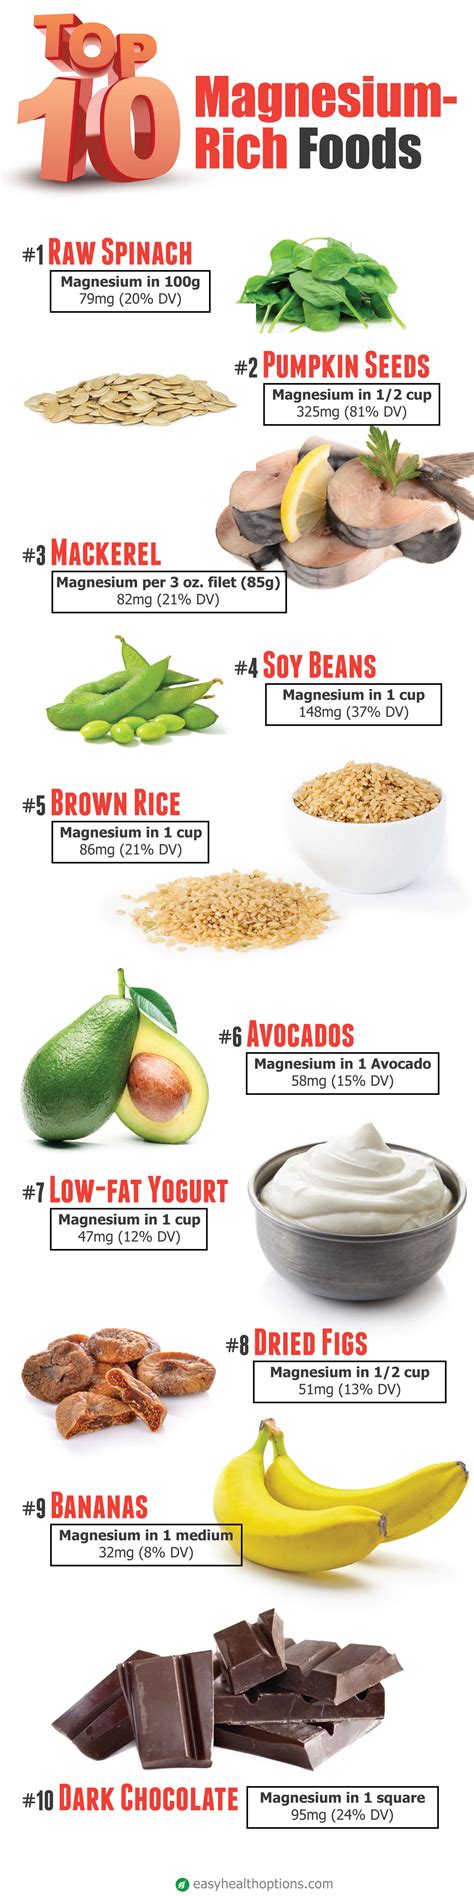 Top 10 Magnesium Rich Foods Infographic Easy Health Options®